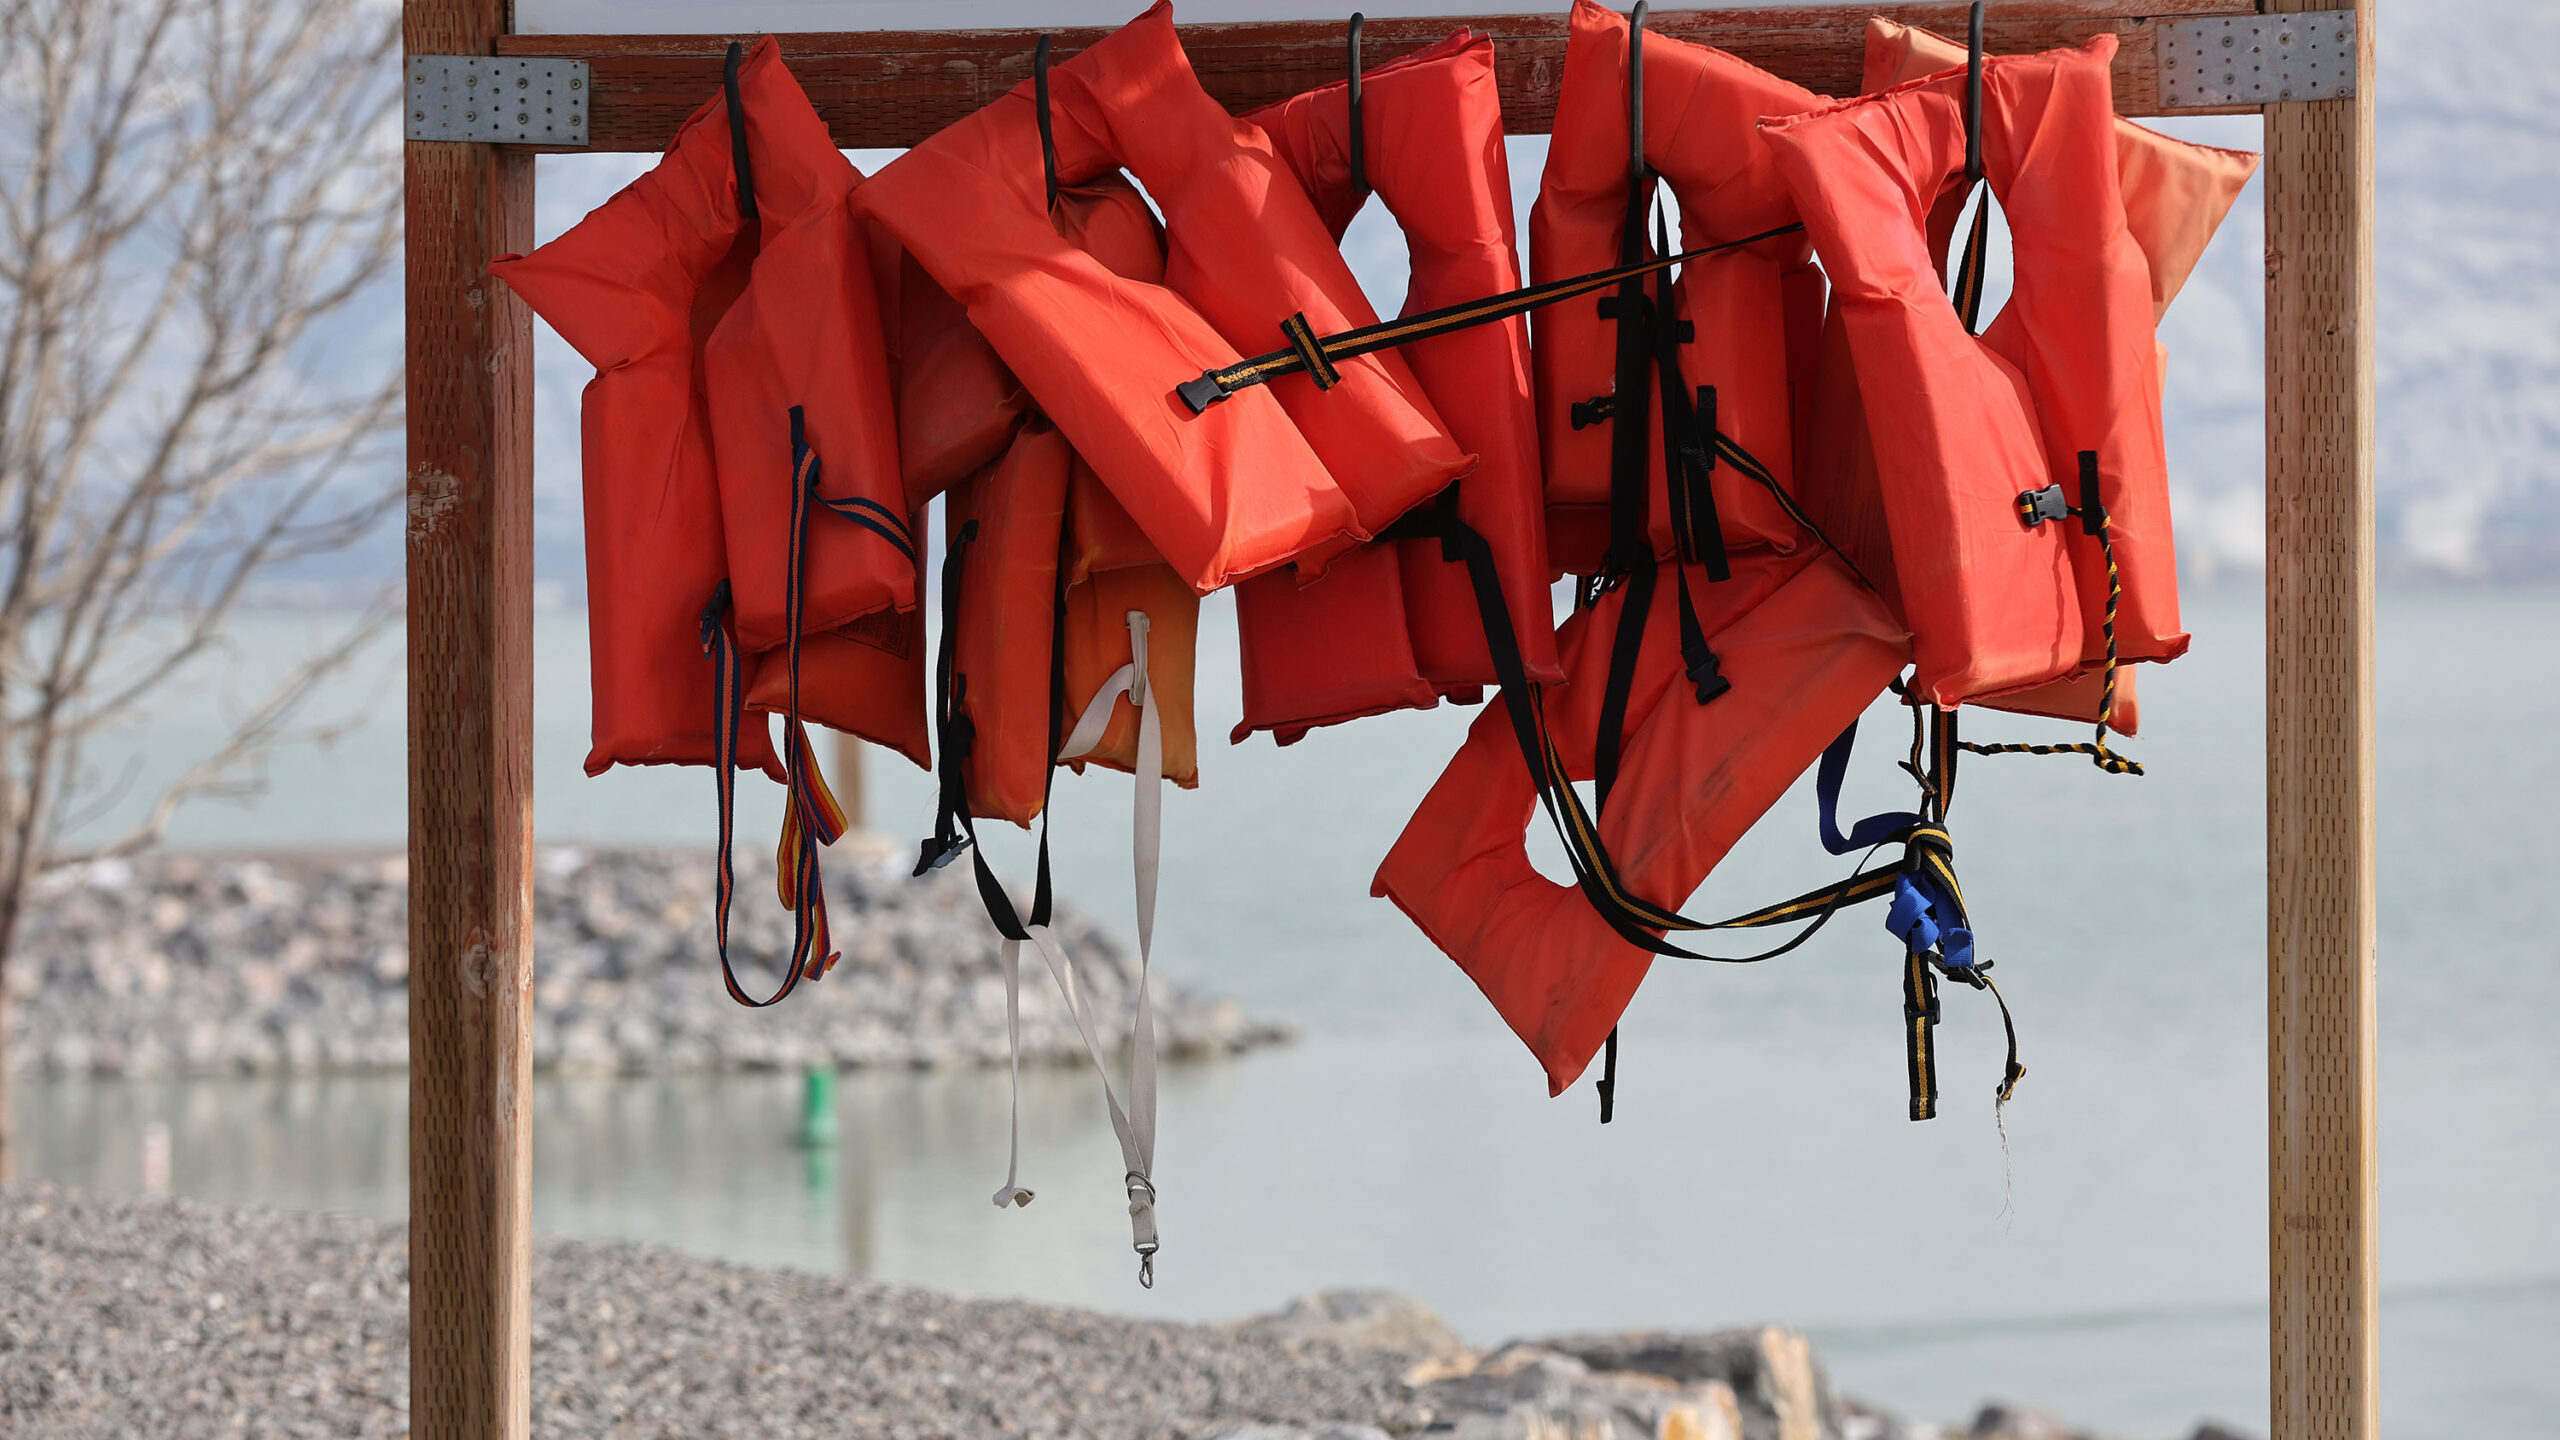 Summertime means reminders about life jacket safety [Video]